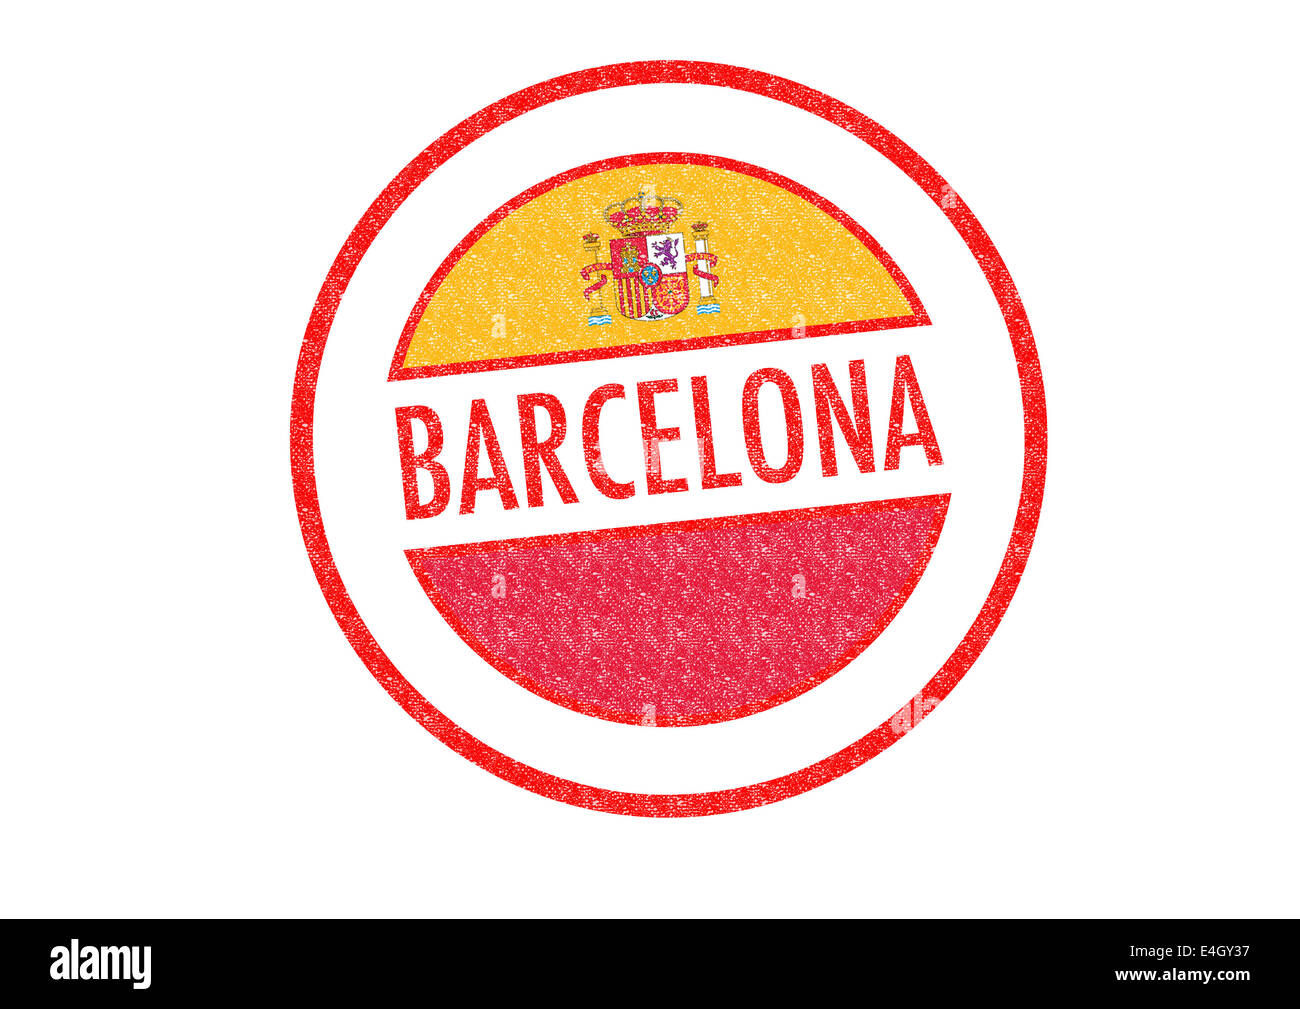 Passport-style BARCELONA rubber stamp over a white background. Stock Photo